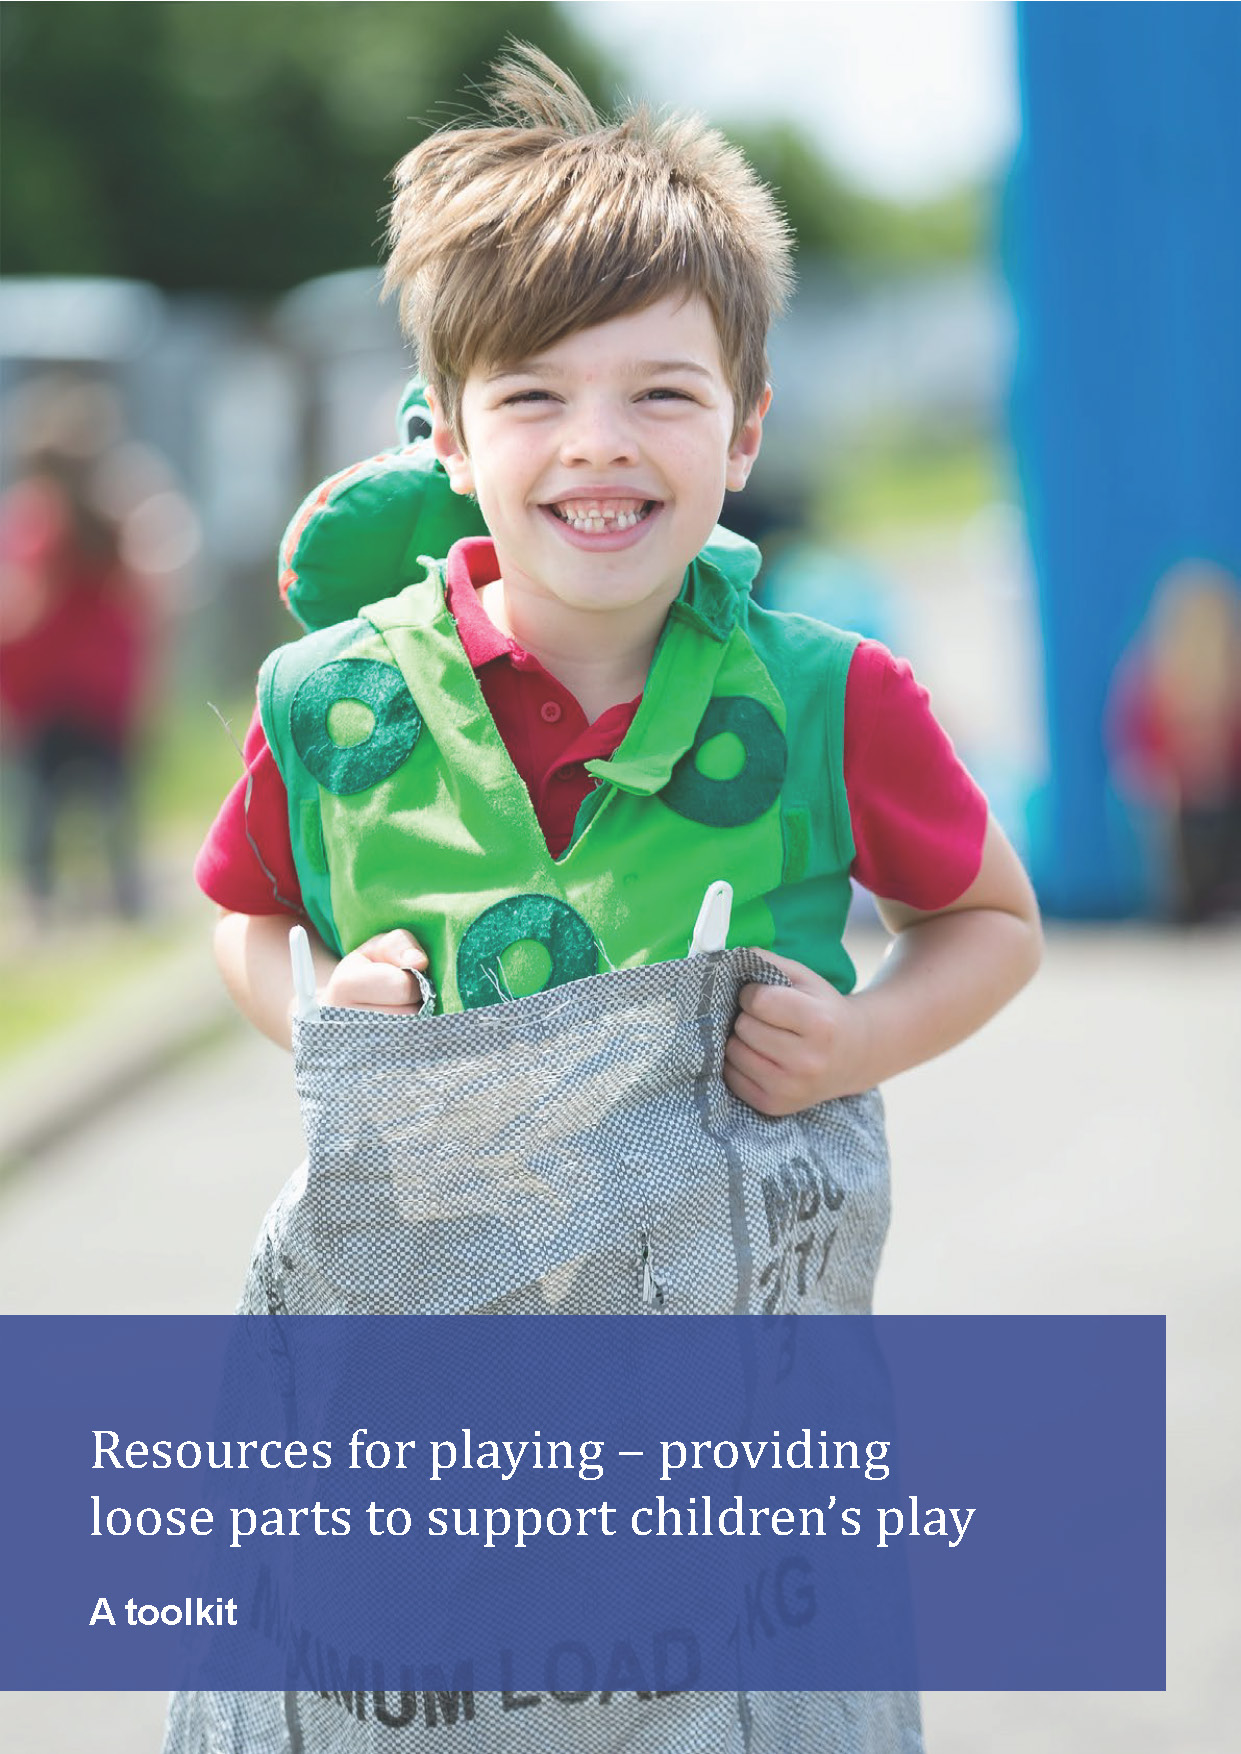 Resources for playing – providing loose parts to support children’s play